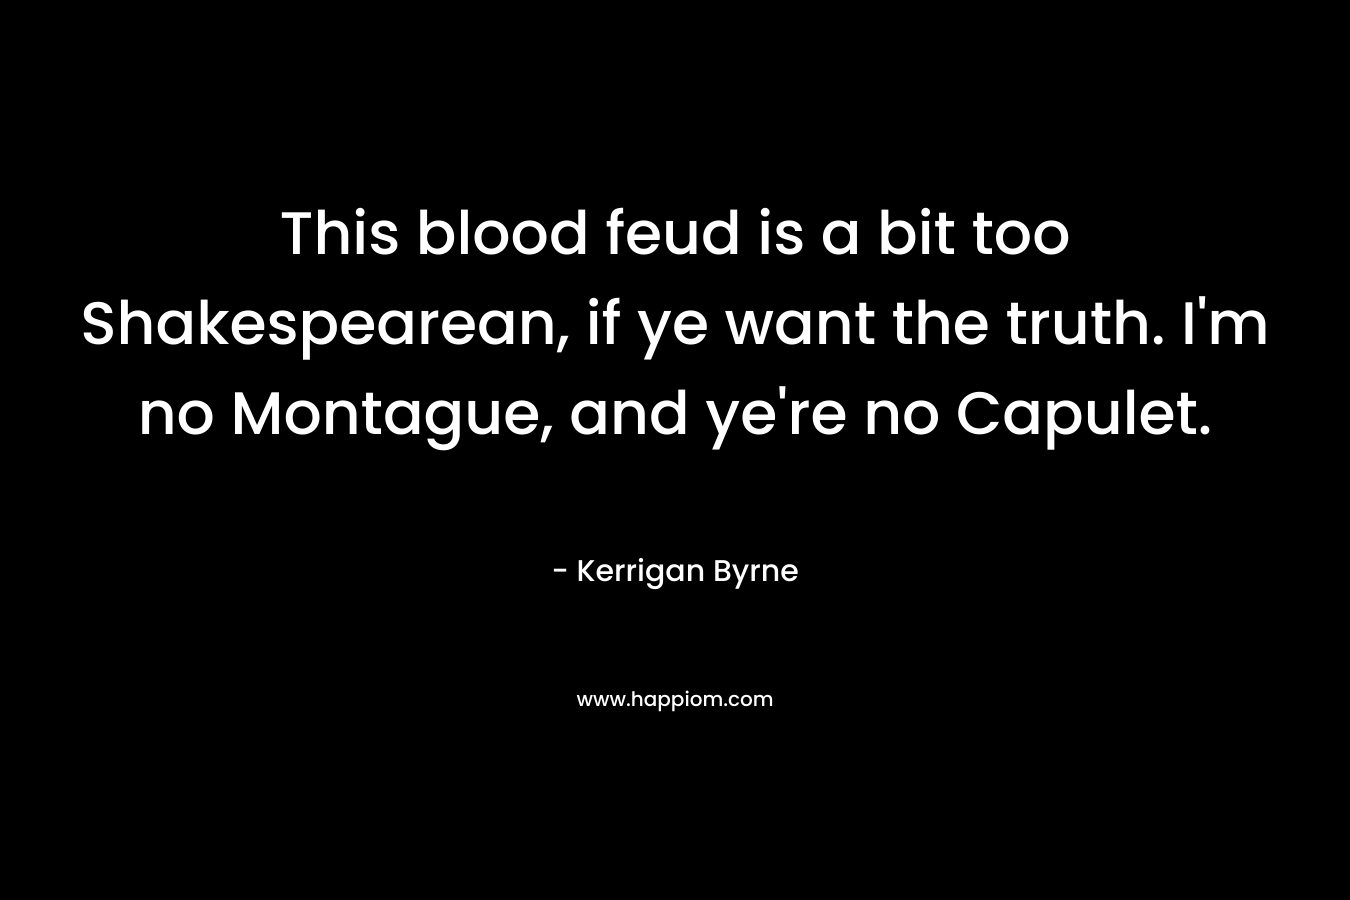 This blood feud is a bit too Shakespearean, if ye want the truth. I’m no Montague, and ye’re no Capulet. – Kerrigan Byrne